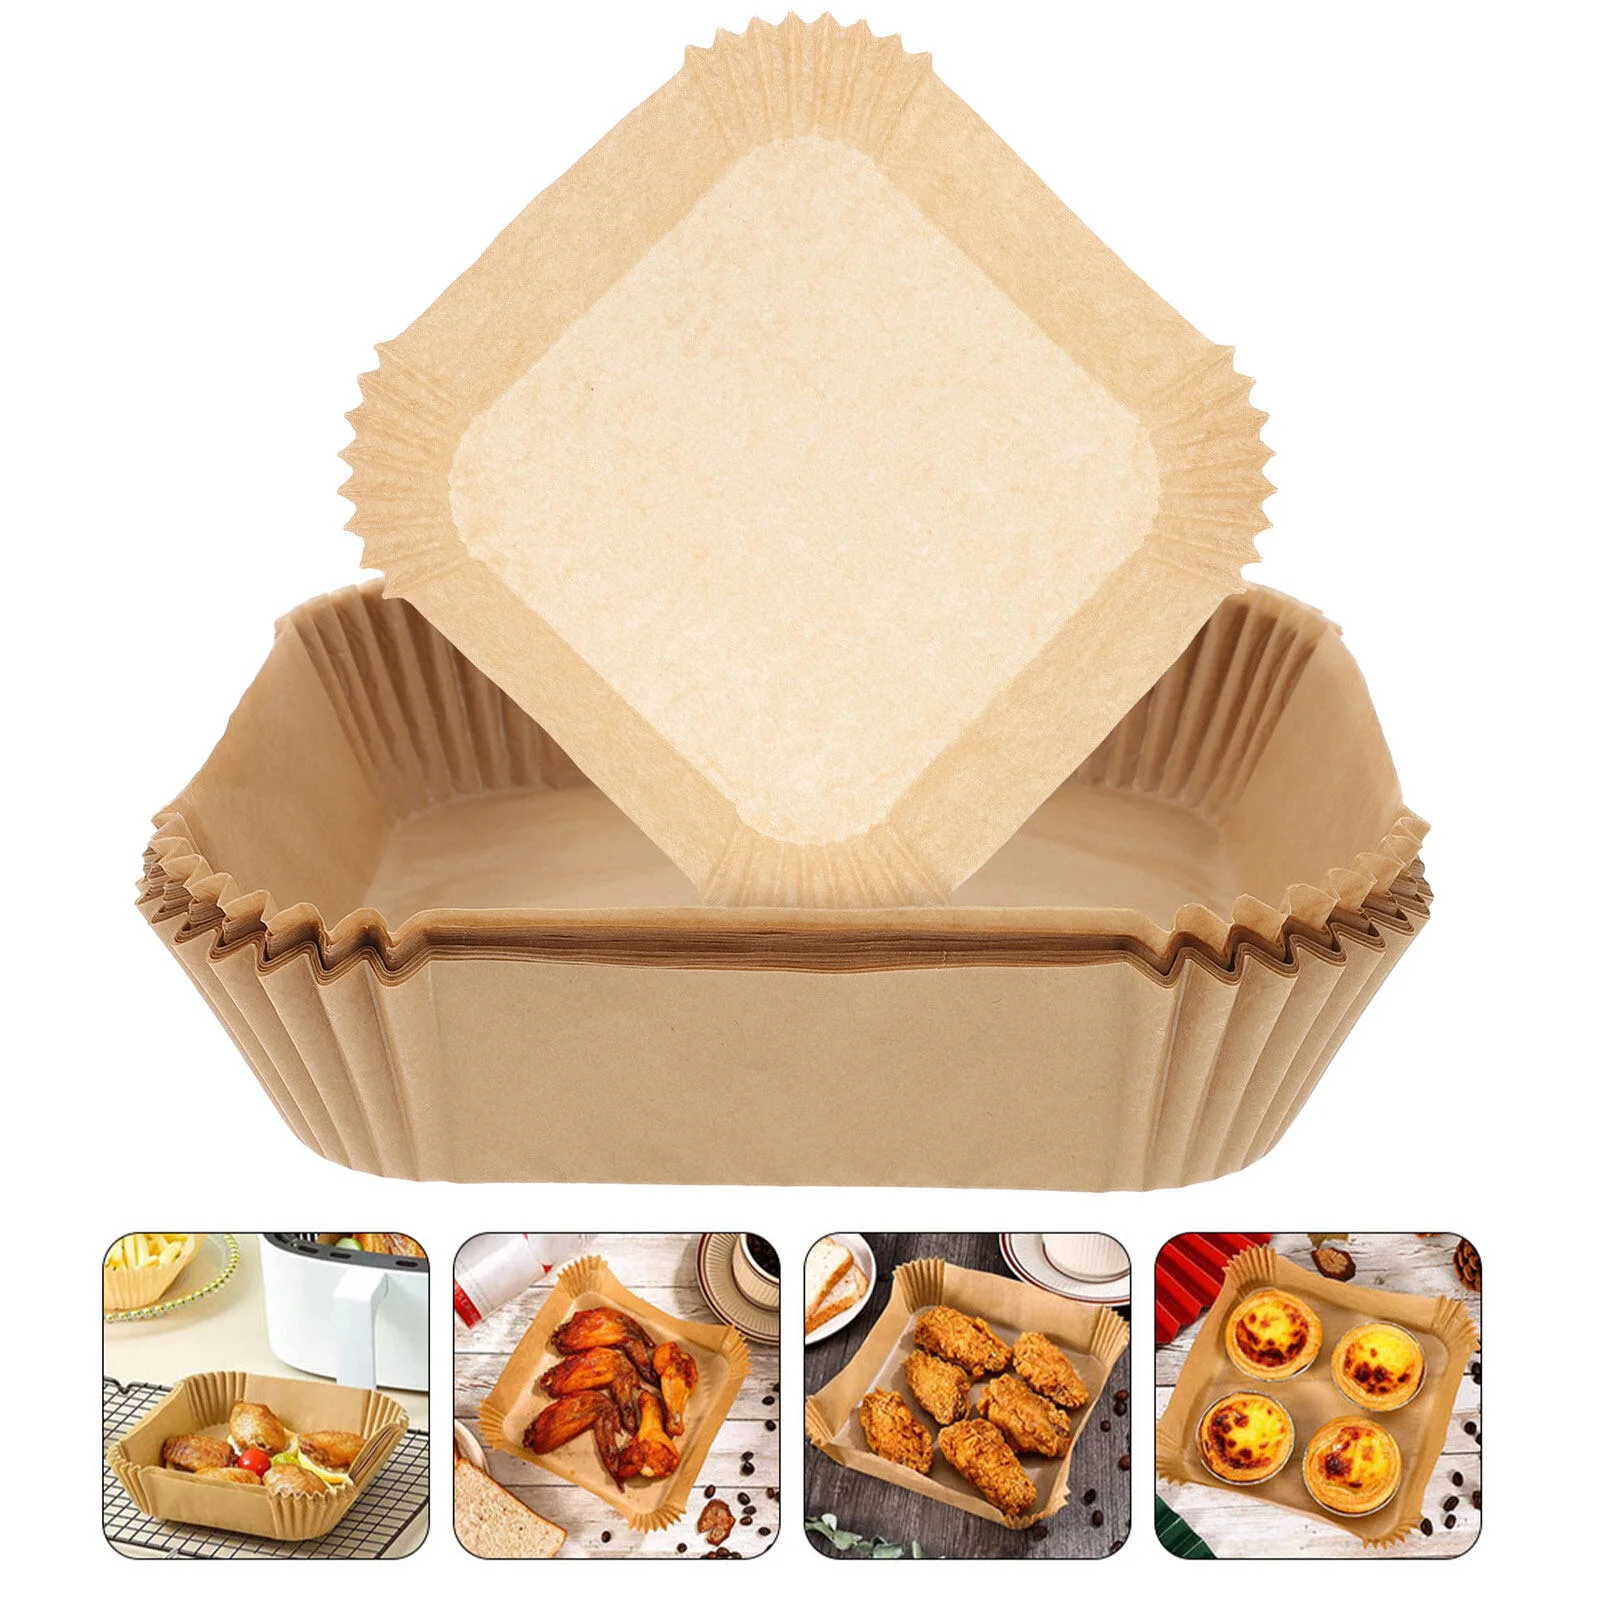 

100 Pcs Square Pans Baking Silicone Pot Air Fryer Paper Tray Food Cooking Pad Heat-resistant Mat Virgin Wood Pulp Oven Liner